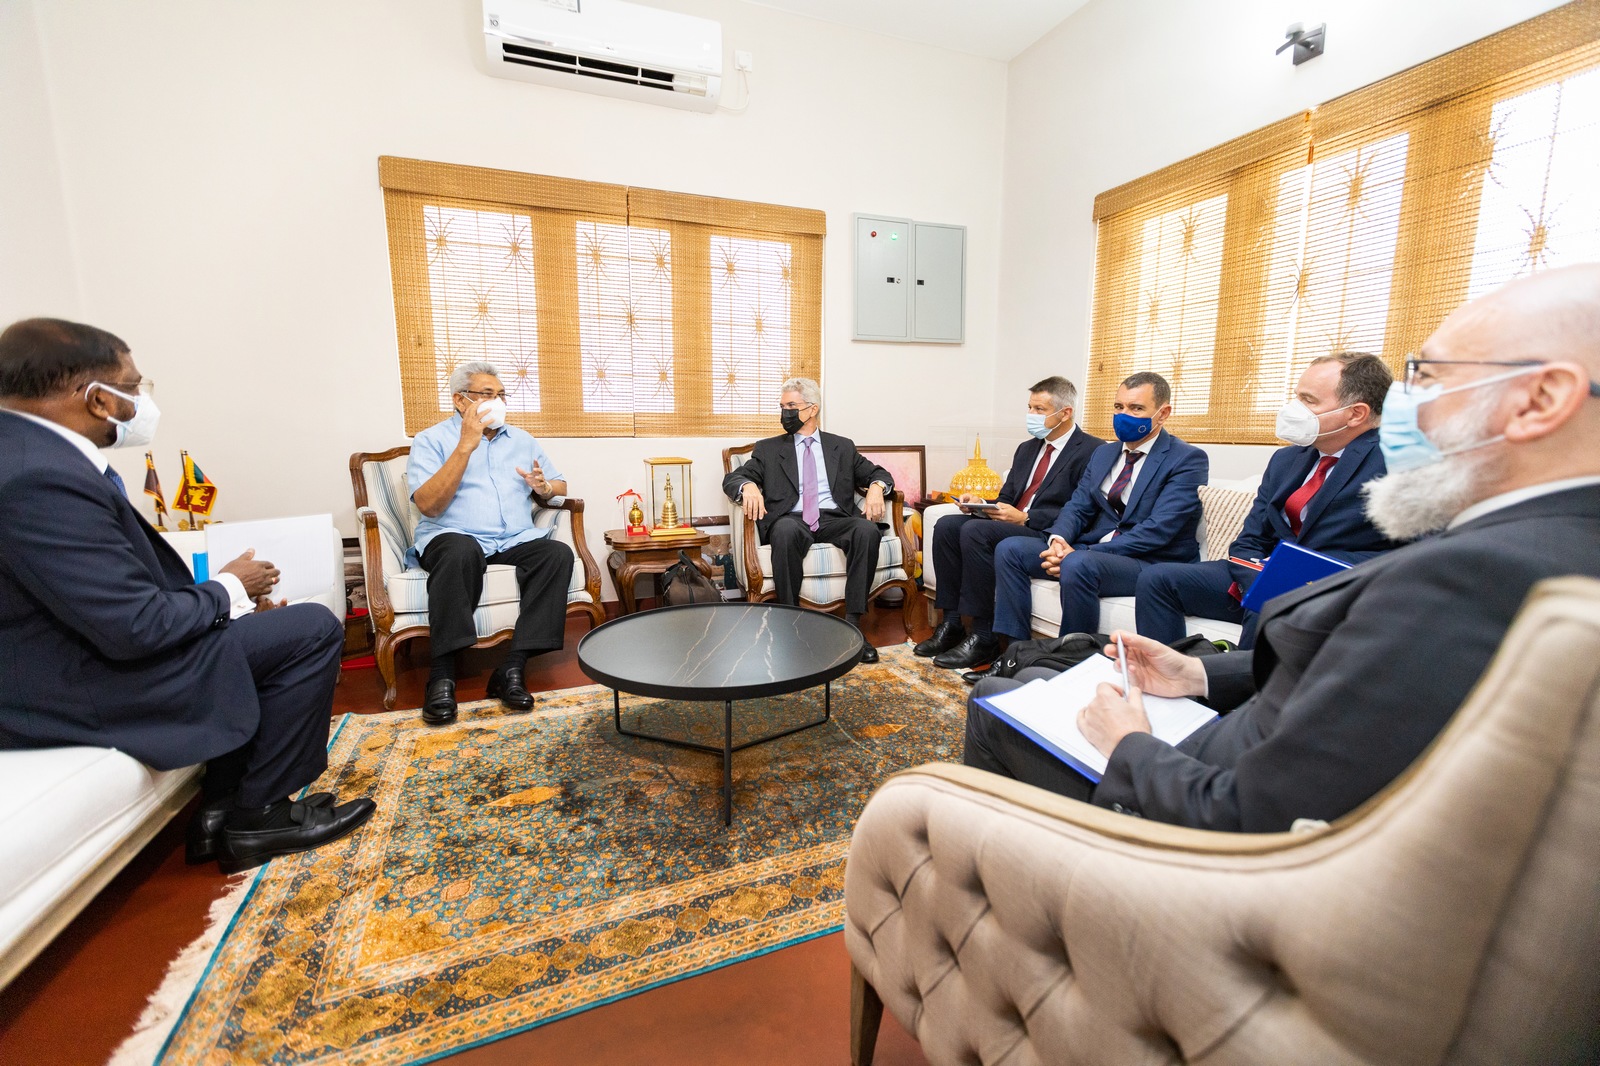 Issues will be resolved through a democratic system President tells the EU delegation